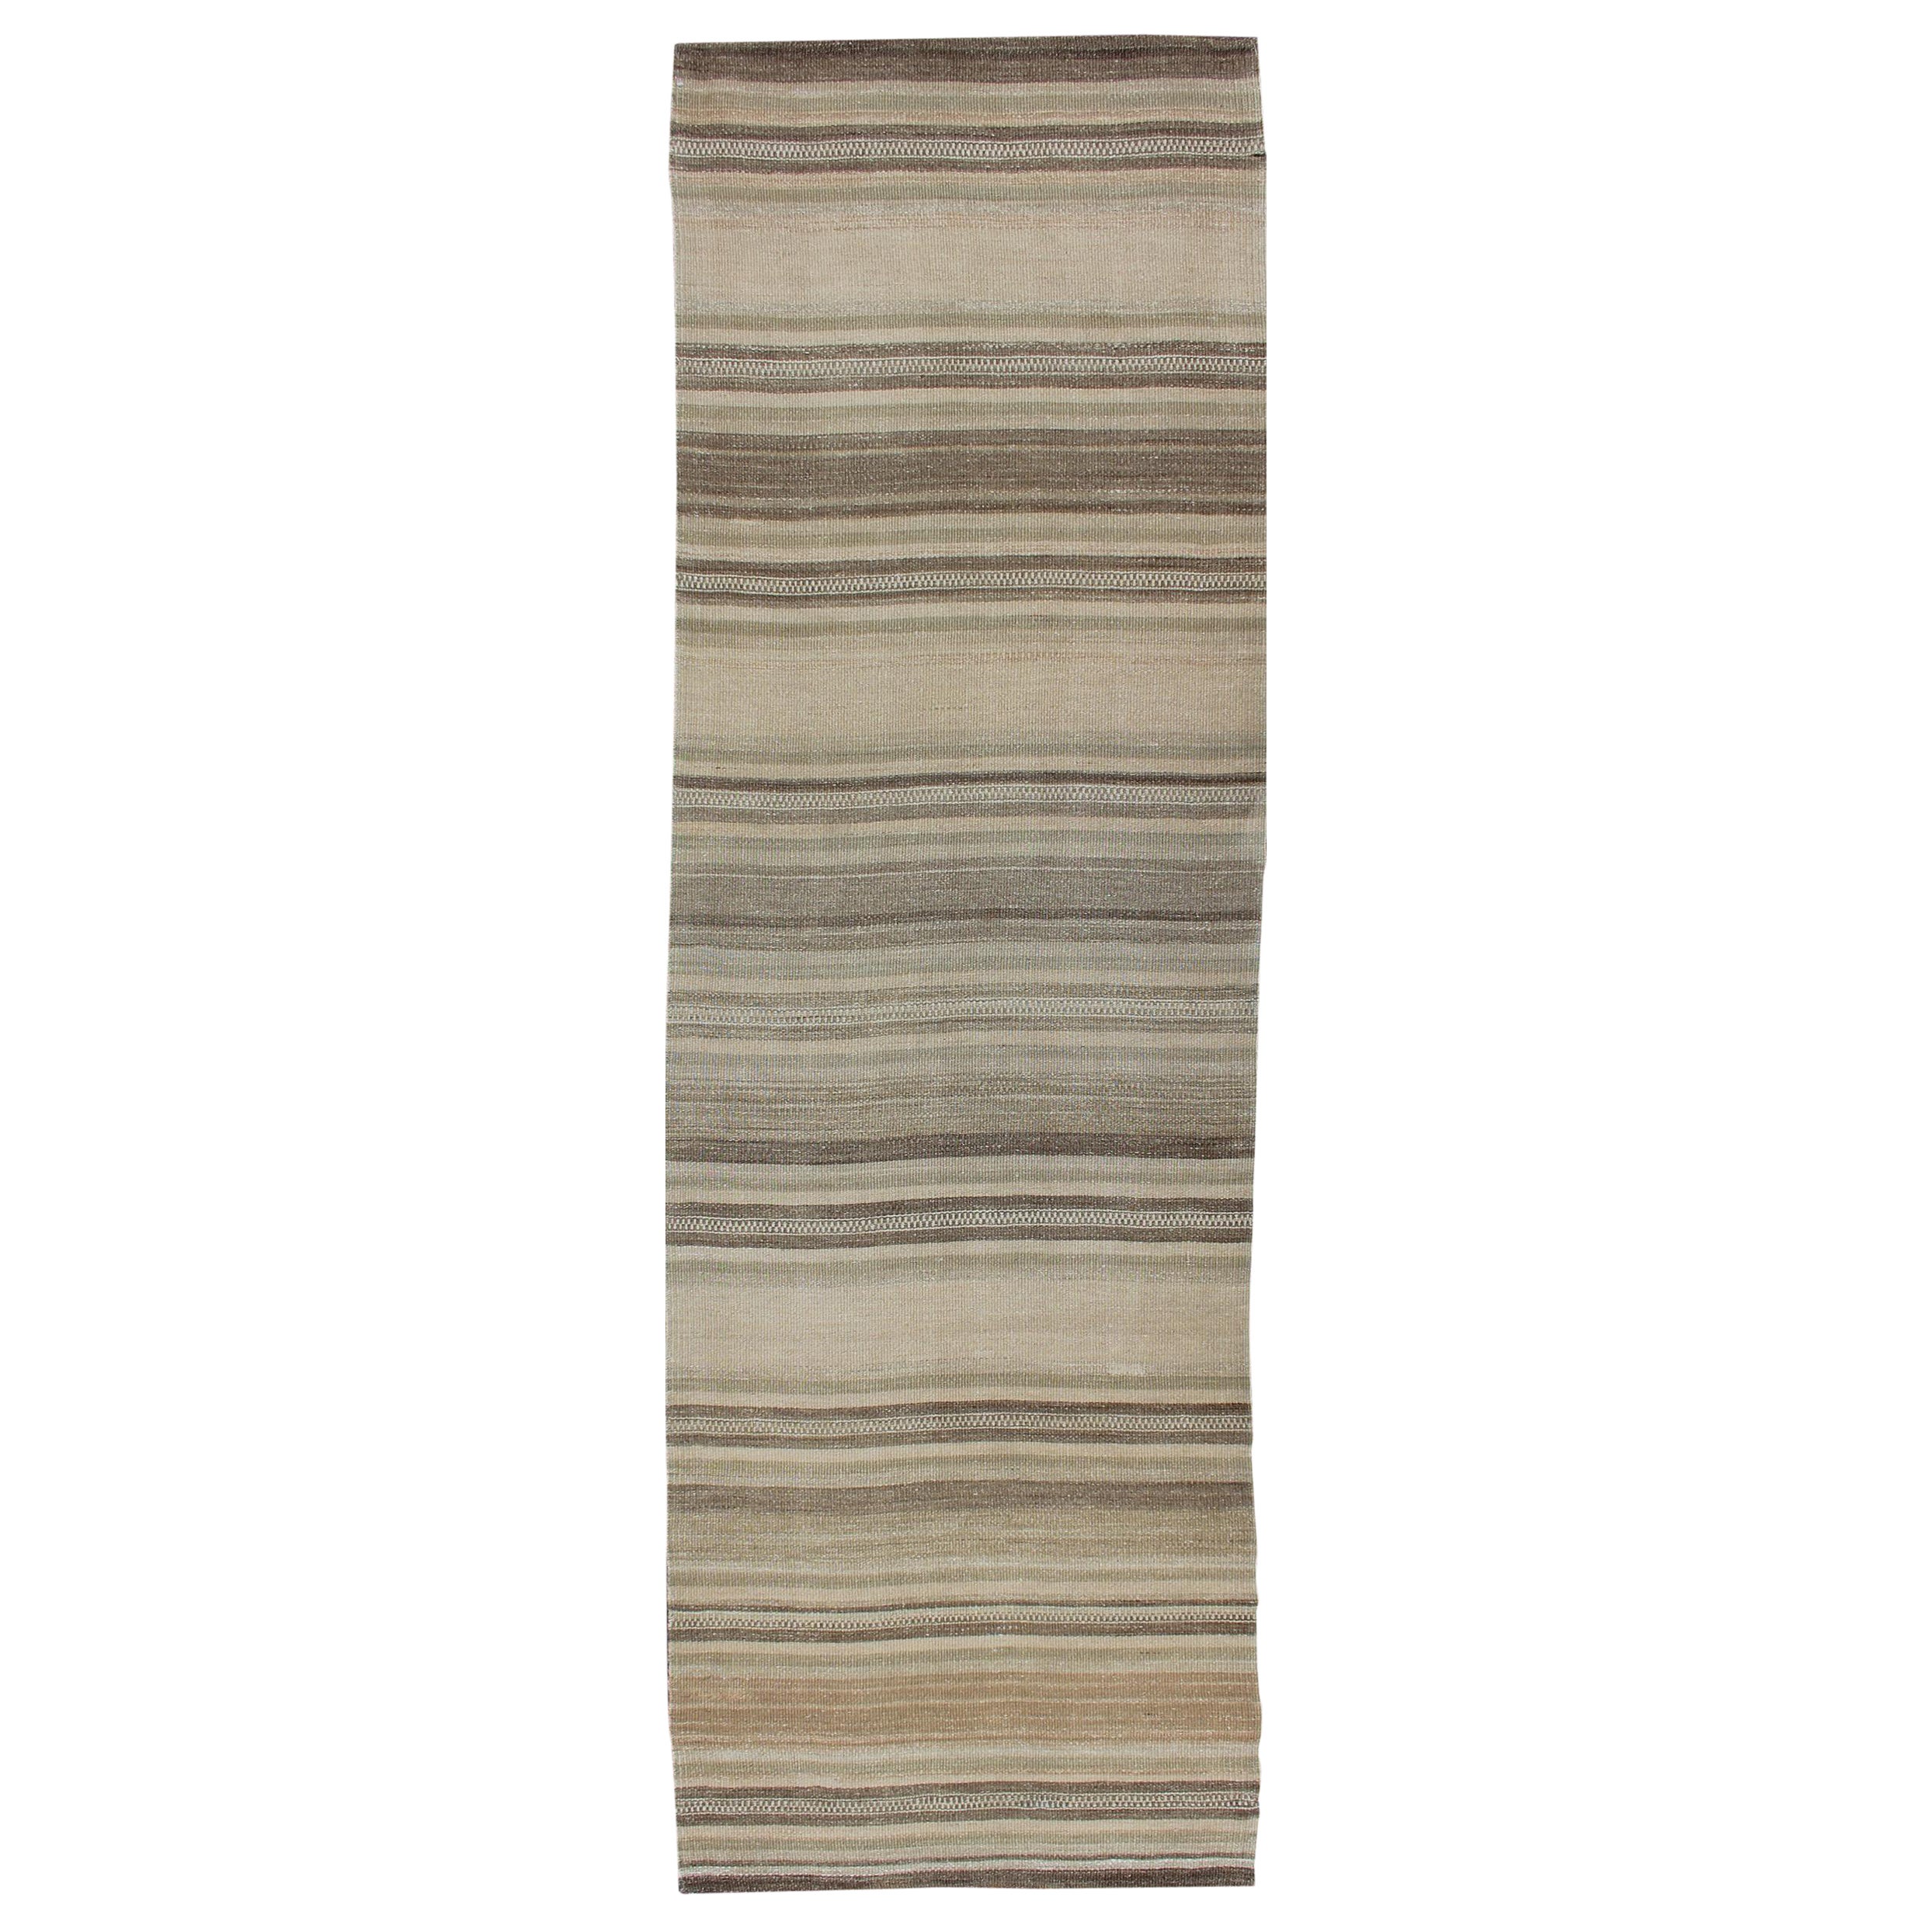 Striped Vintage Turkish Flat-Weave Runner with Tans, Brown and Olive Green For Sale